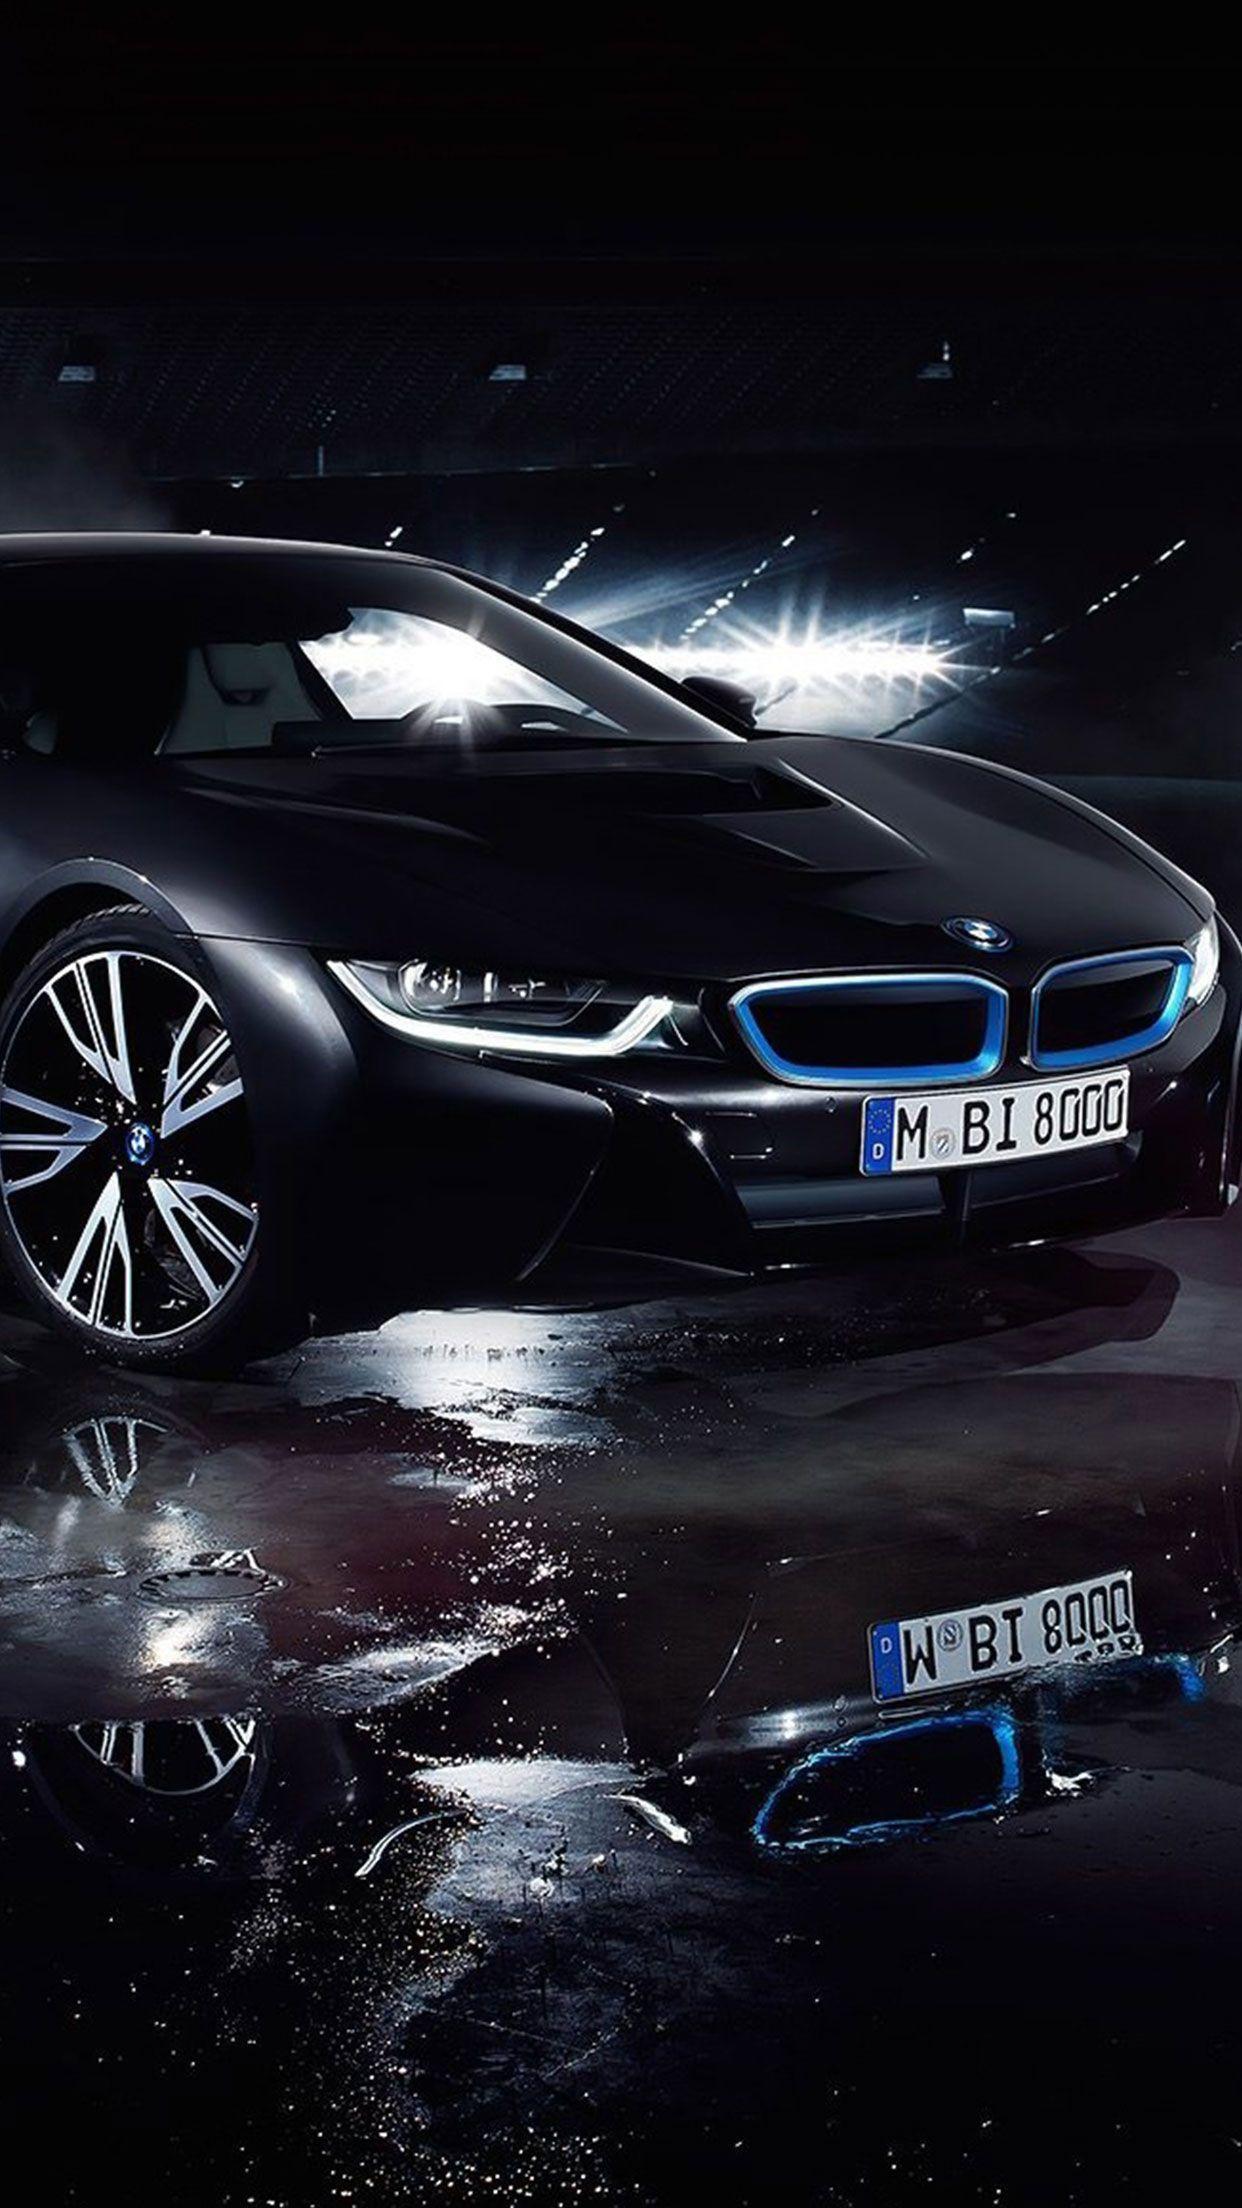 Black BMW i8 car wallpaper for #iPhone and #Android #bmw #black